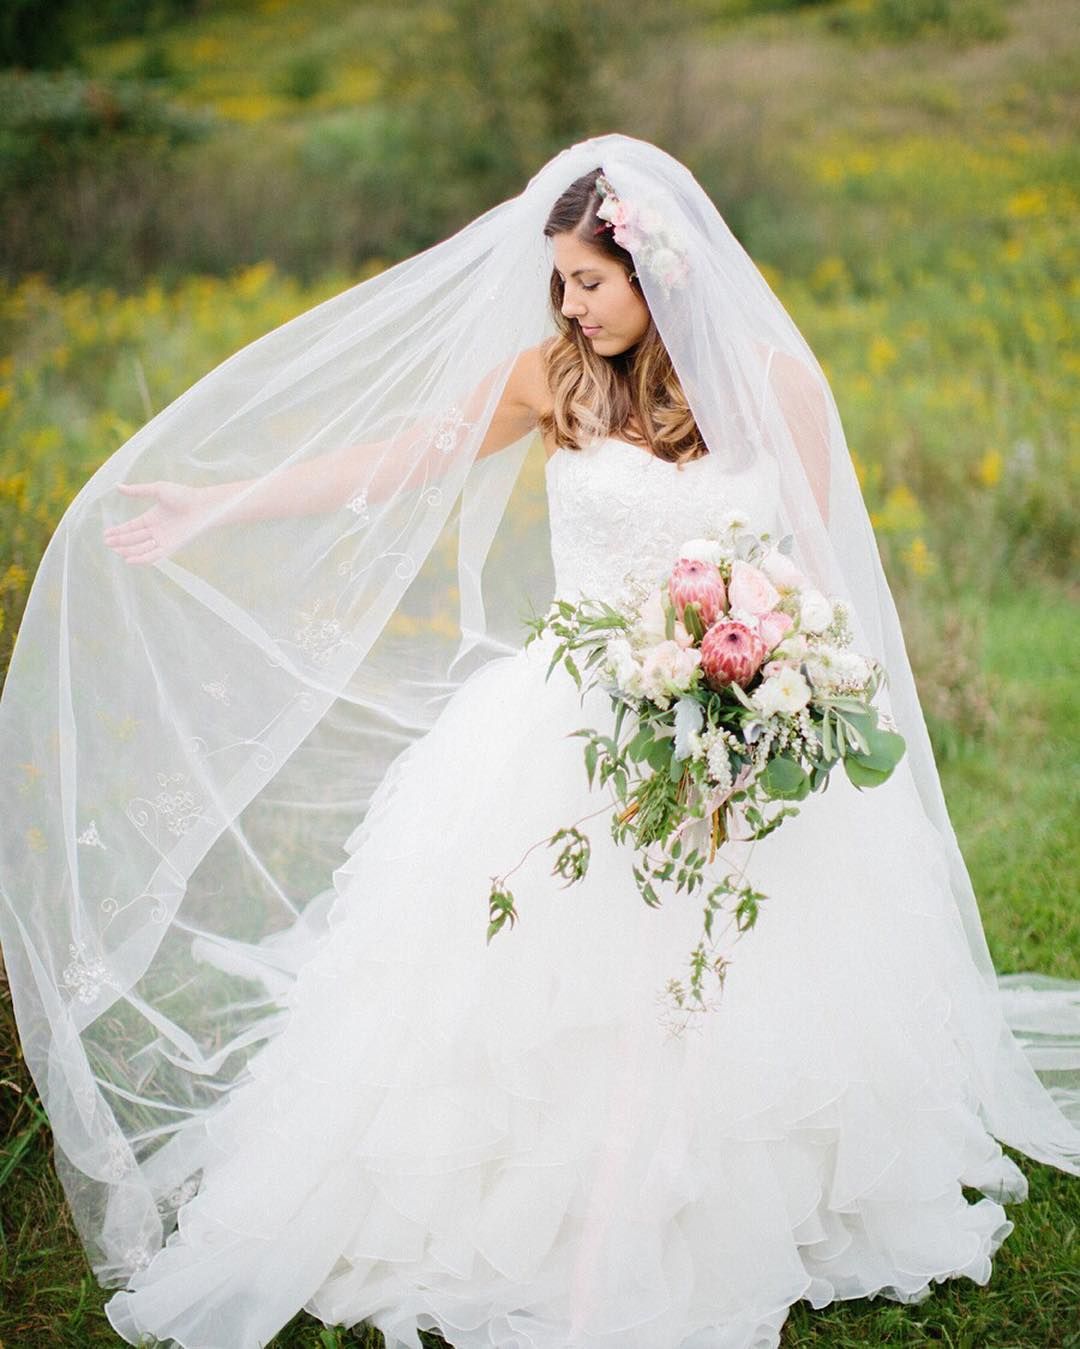 A Bridal Ball Gown And Cathedral Veil Make For A Classic Combination For Your Wedding Dress Preservation Davids Bridal Wedding Dresses Romantic Wedding Photos